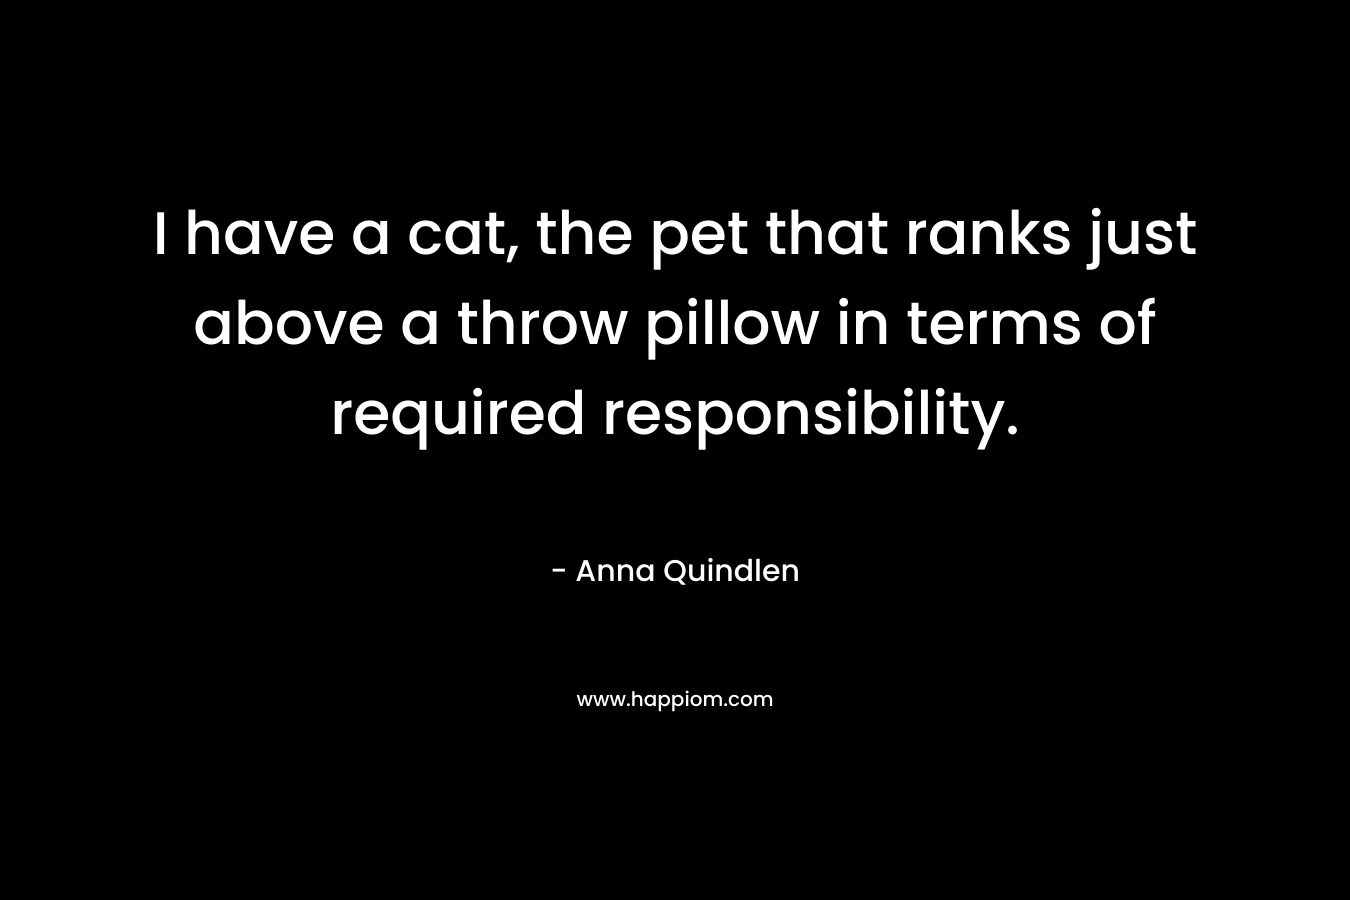 I have a cat, the pet that ranks just above a throw pillow in terms of required responsibility. – Anna Quindlen